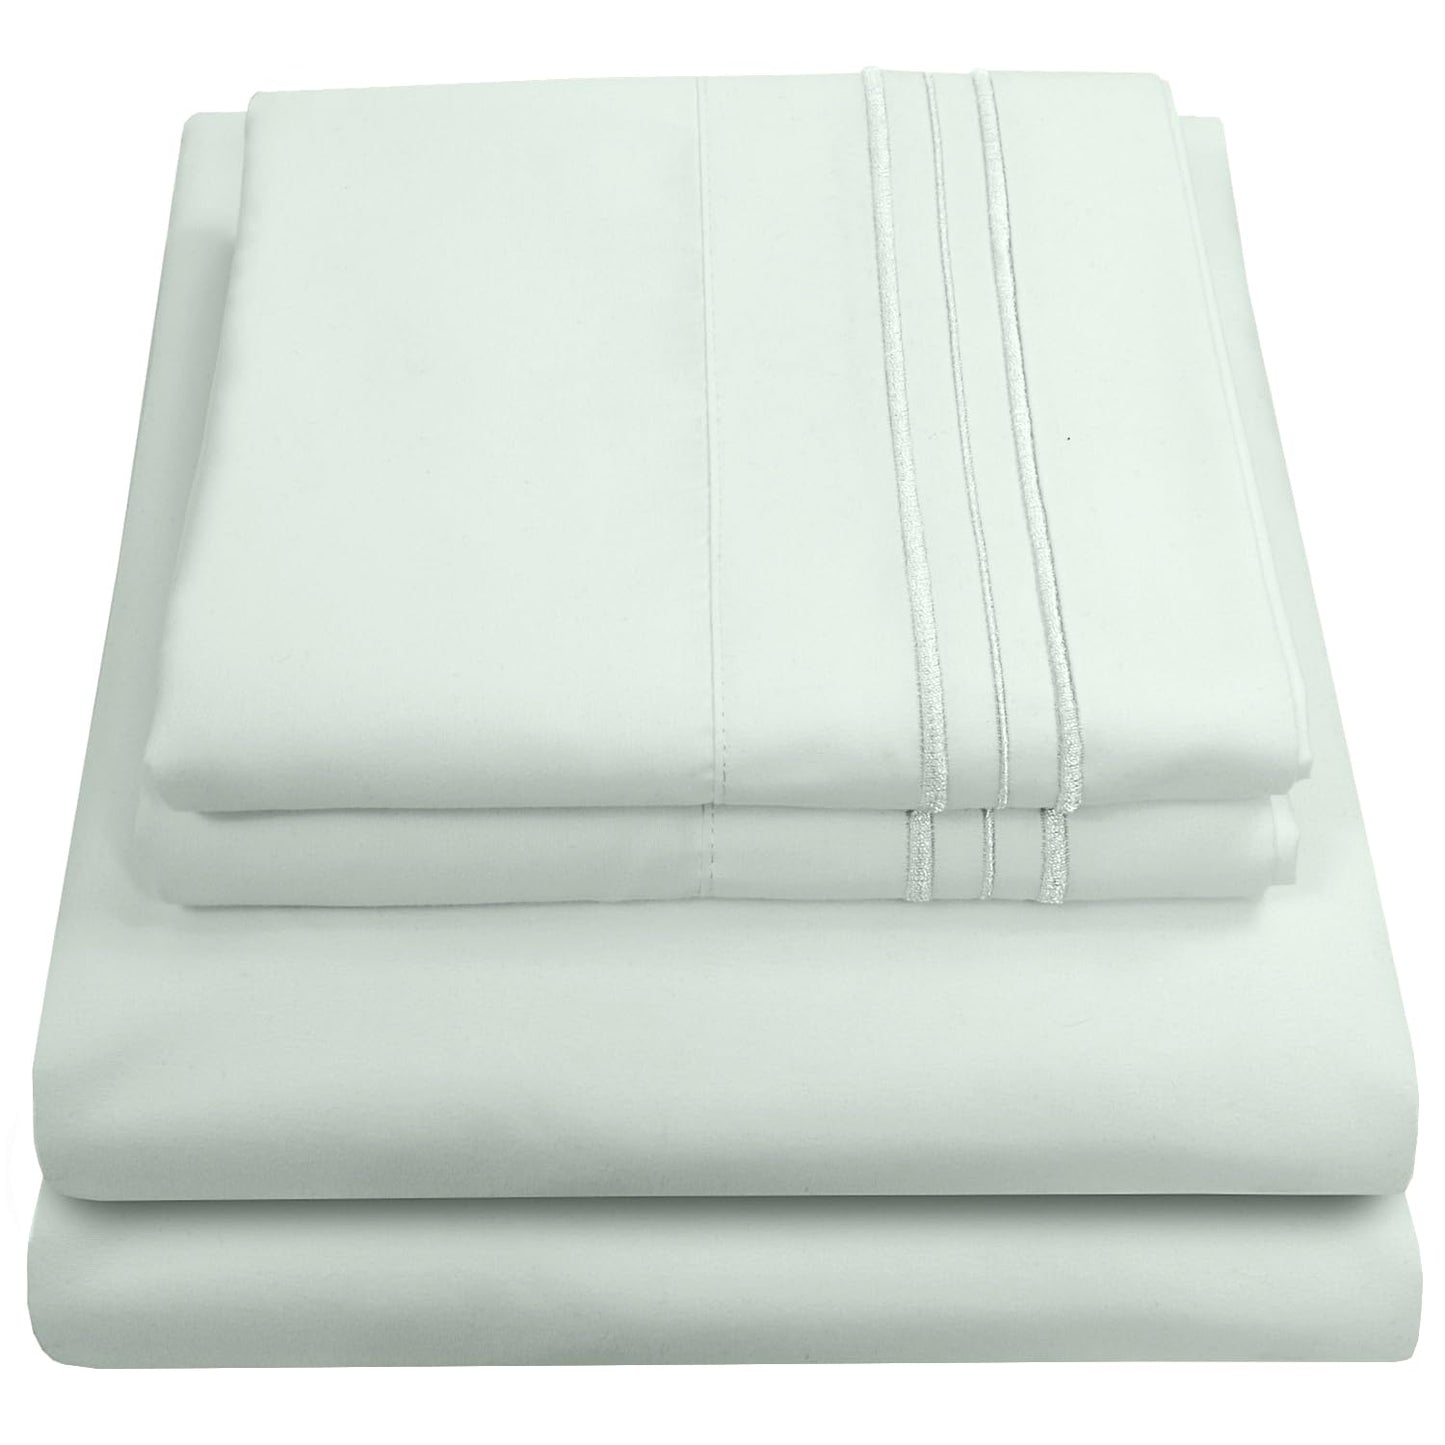 Twin Sheets - Breathable Luxury Sheets with Full Elastic & Secure Corner Straps Built In - 1800 Supreme Collection Extra Soft Deep Pocket Bedding Set, Sheet Set, Twin, Mint